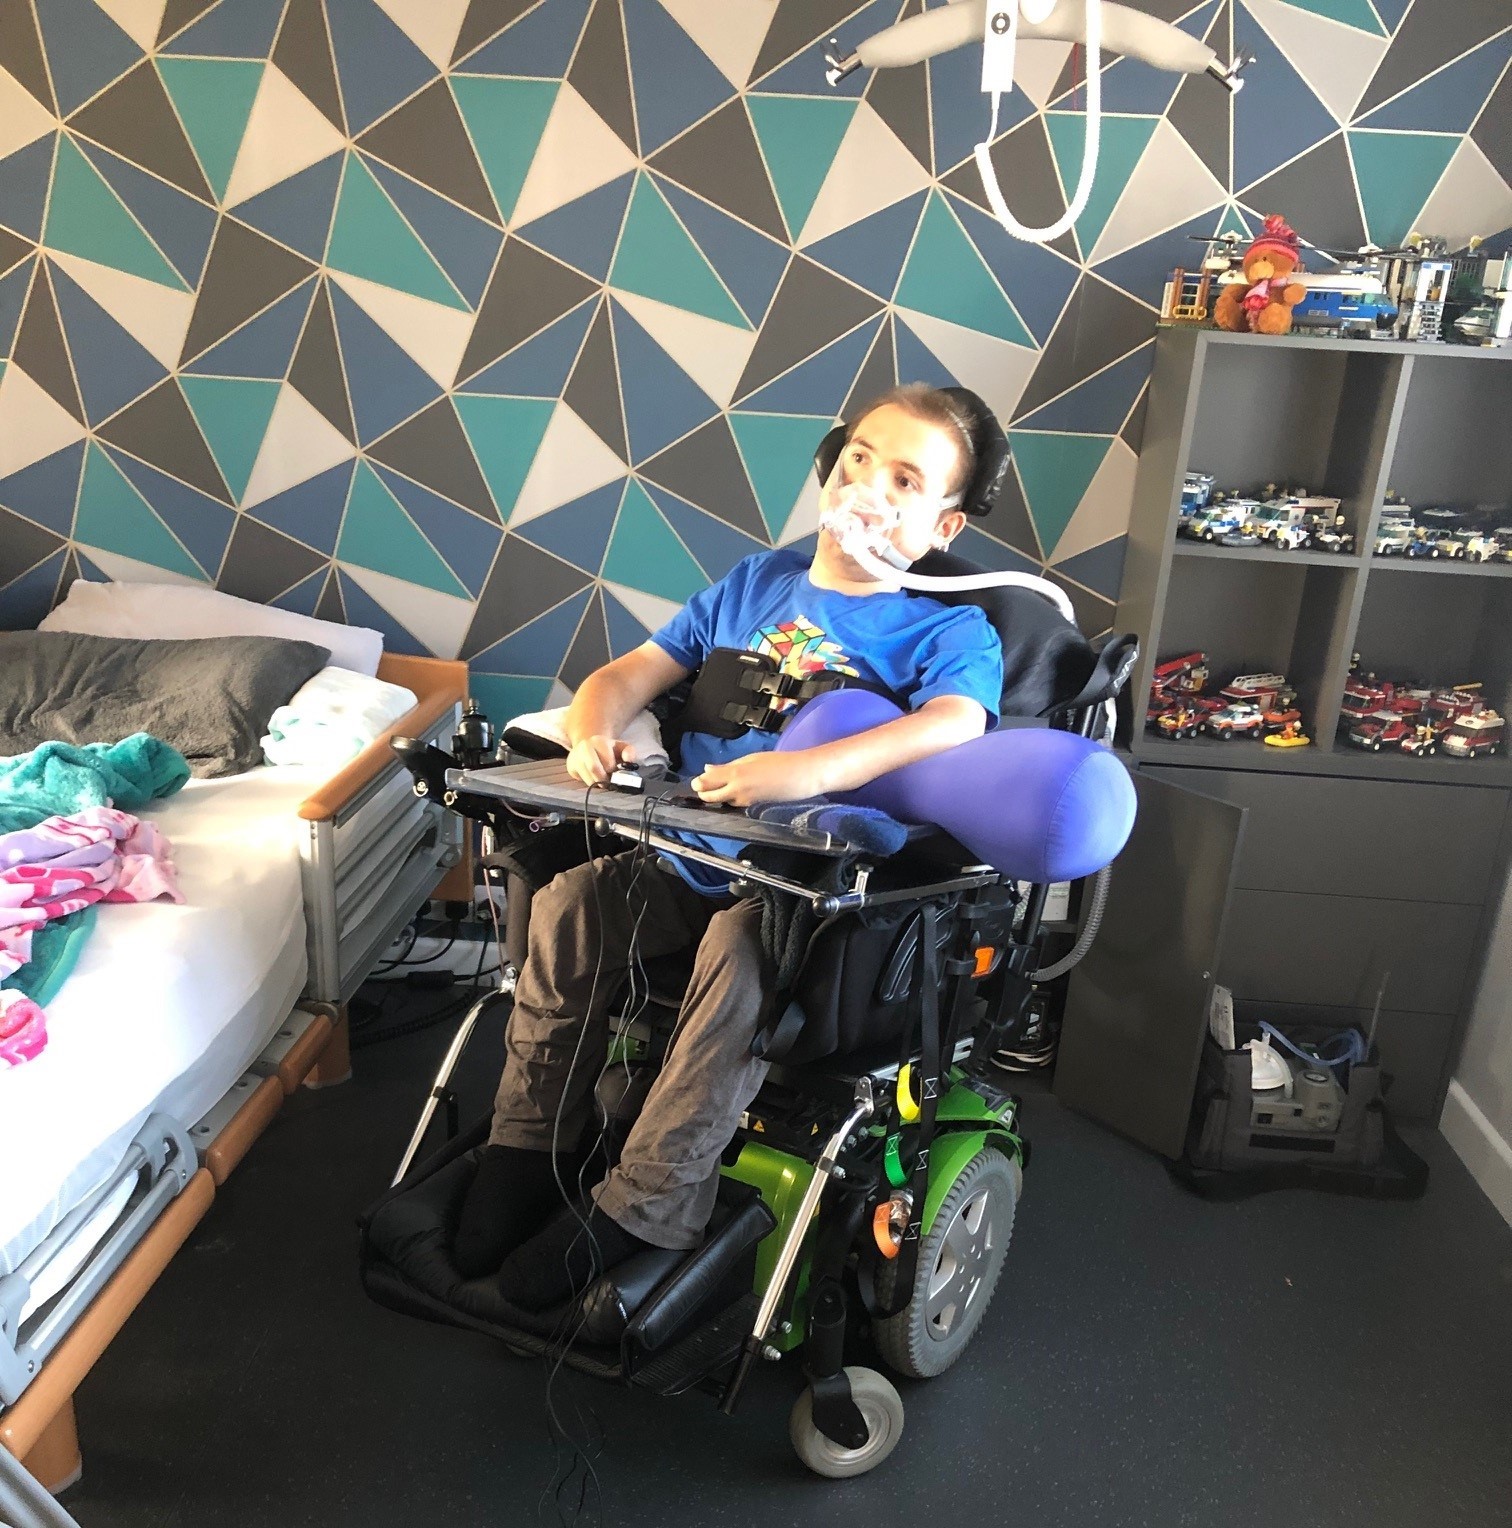 Kieran’s home has been adjusted to accommodate his needs and equipment